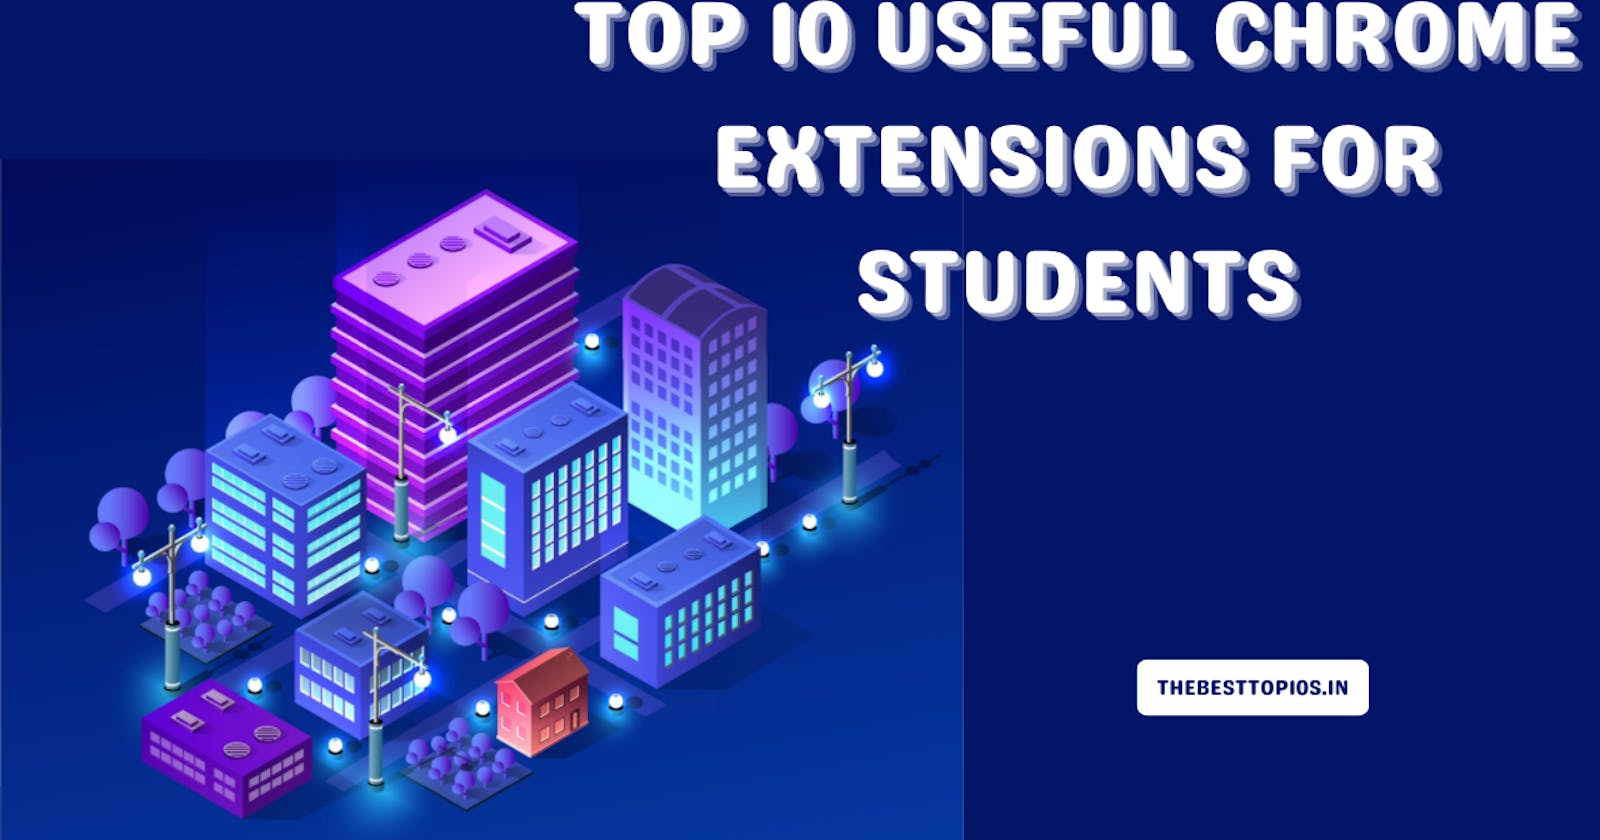 10 Useful Chrome Extensions for Students